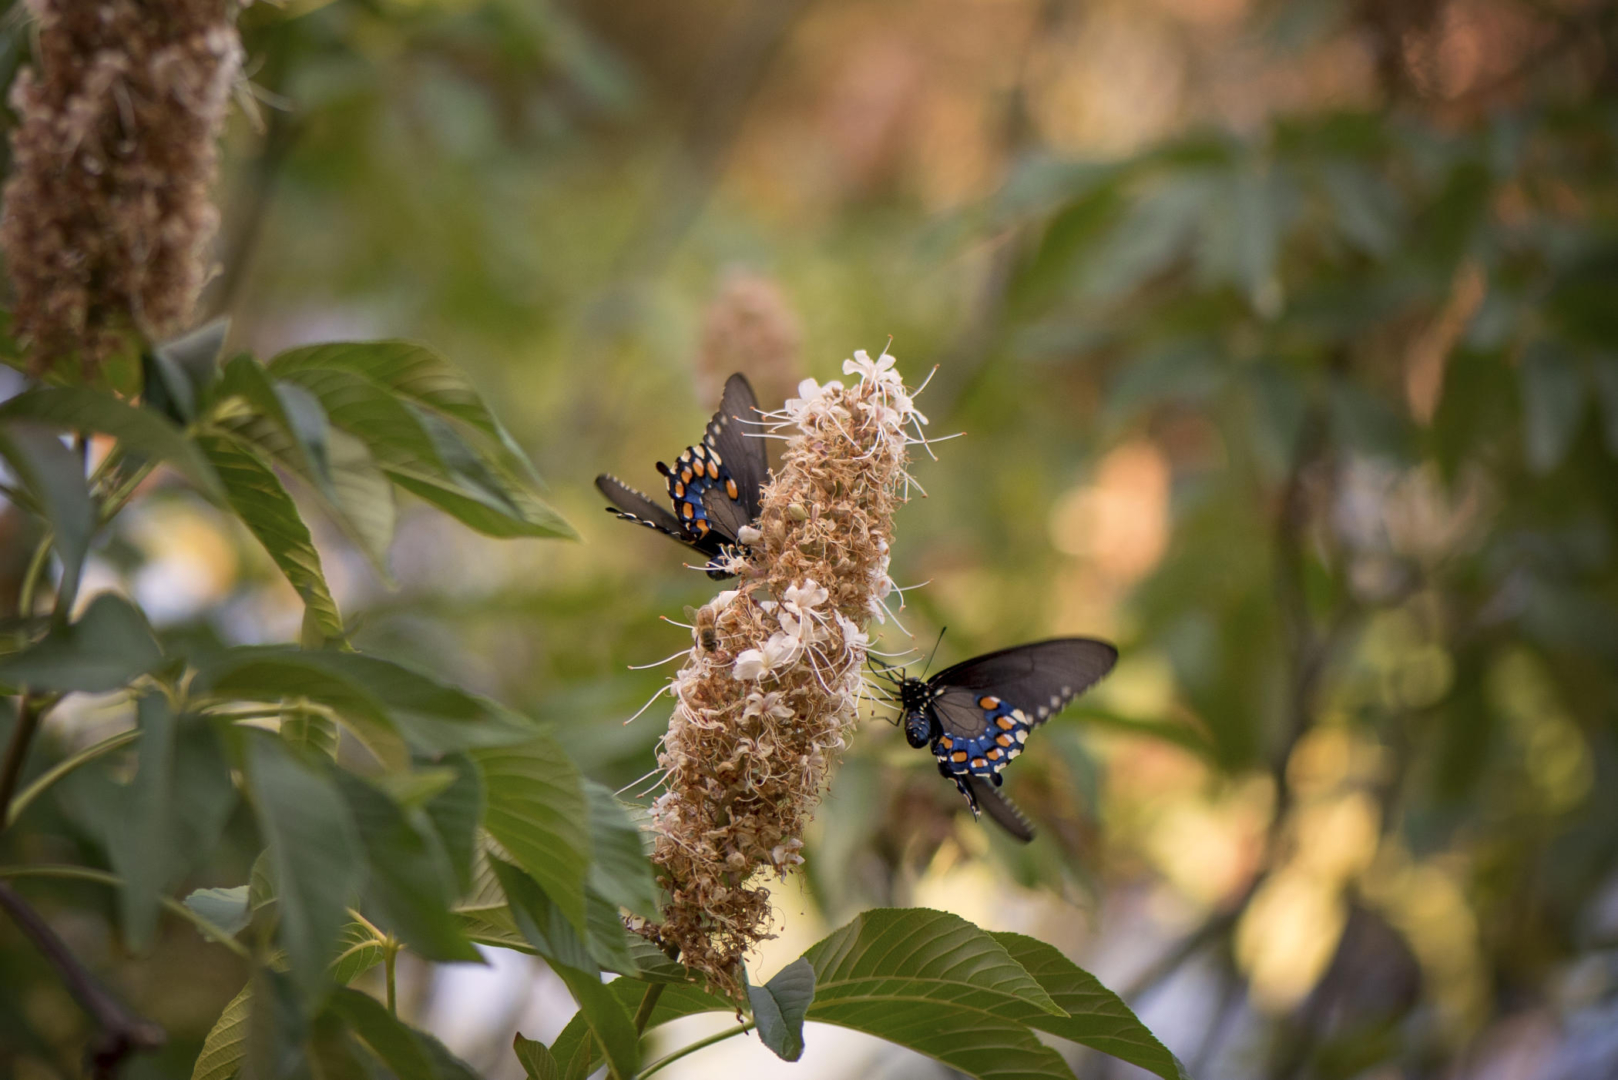 Swallowtail butterflies draw nectar from the blossoms of a buckeye tree.